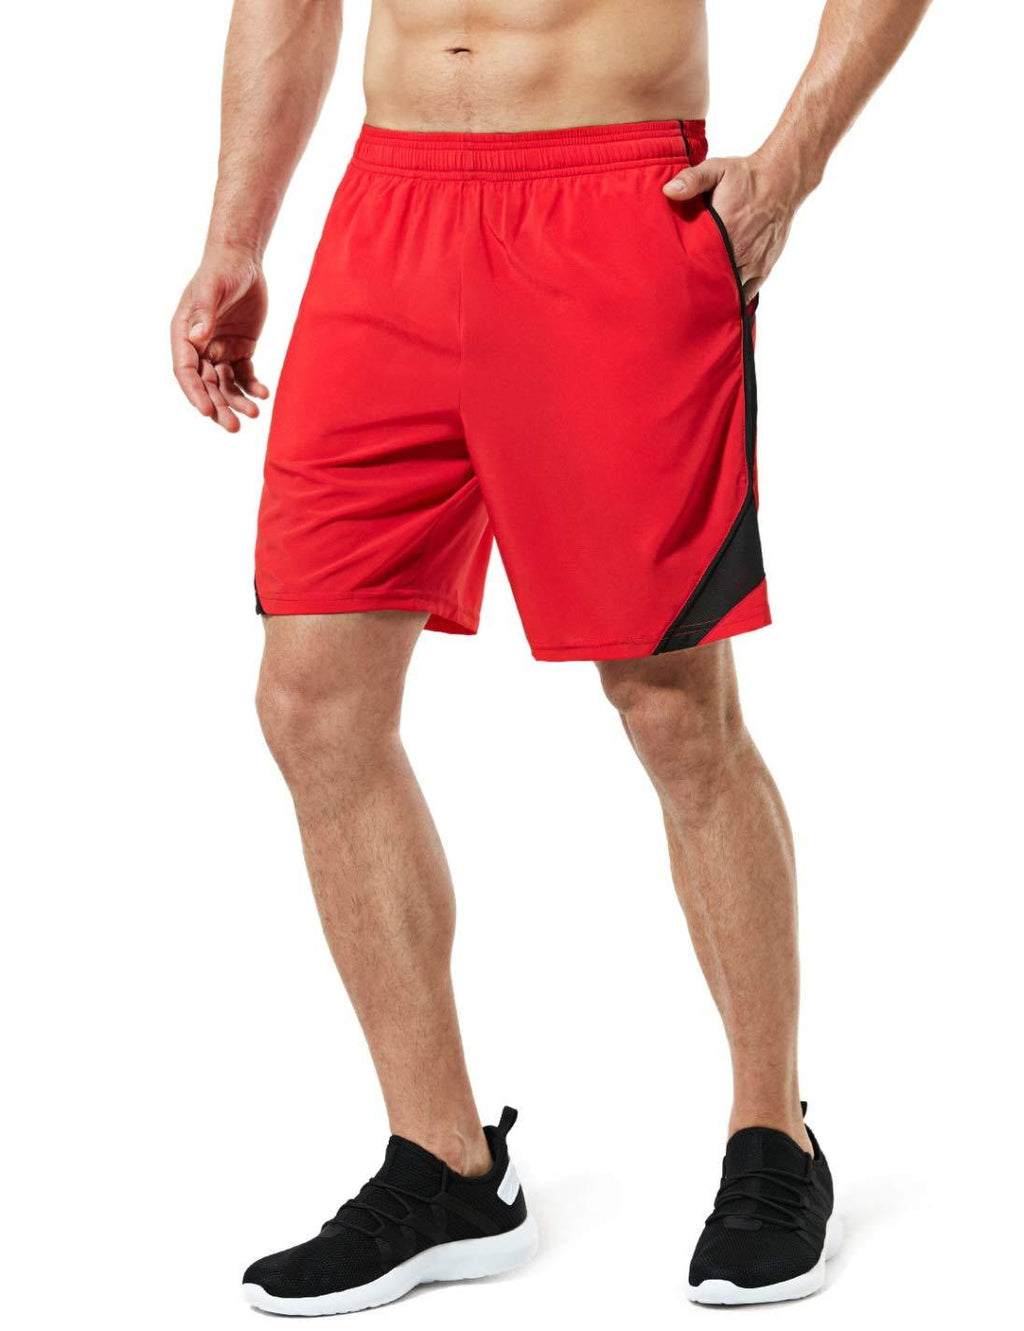 [AUSTRALIA] - TSLA Men's Active Running Shorts, 7 Inch Basketball Gym Traning Workout Shorts, Quick Dry Sports Athletic Shorts with Pockets Rear Zip Pocket(mbh27) - Red Large 